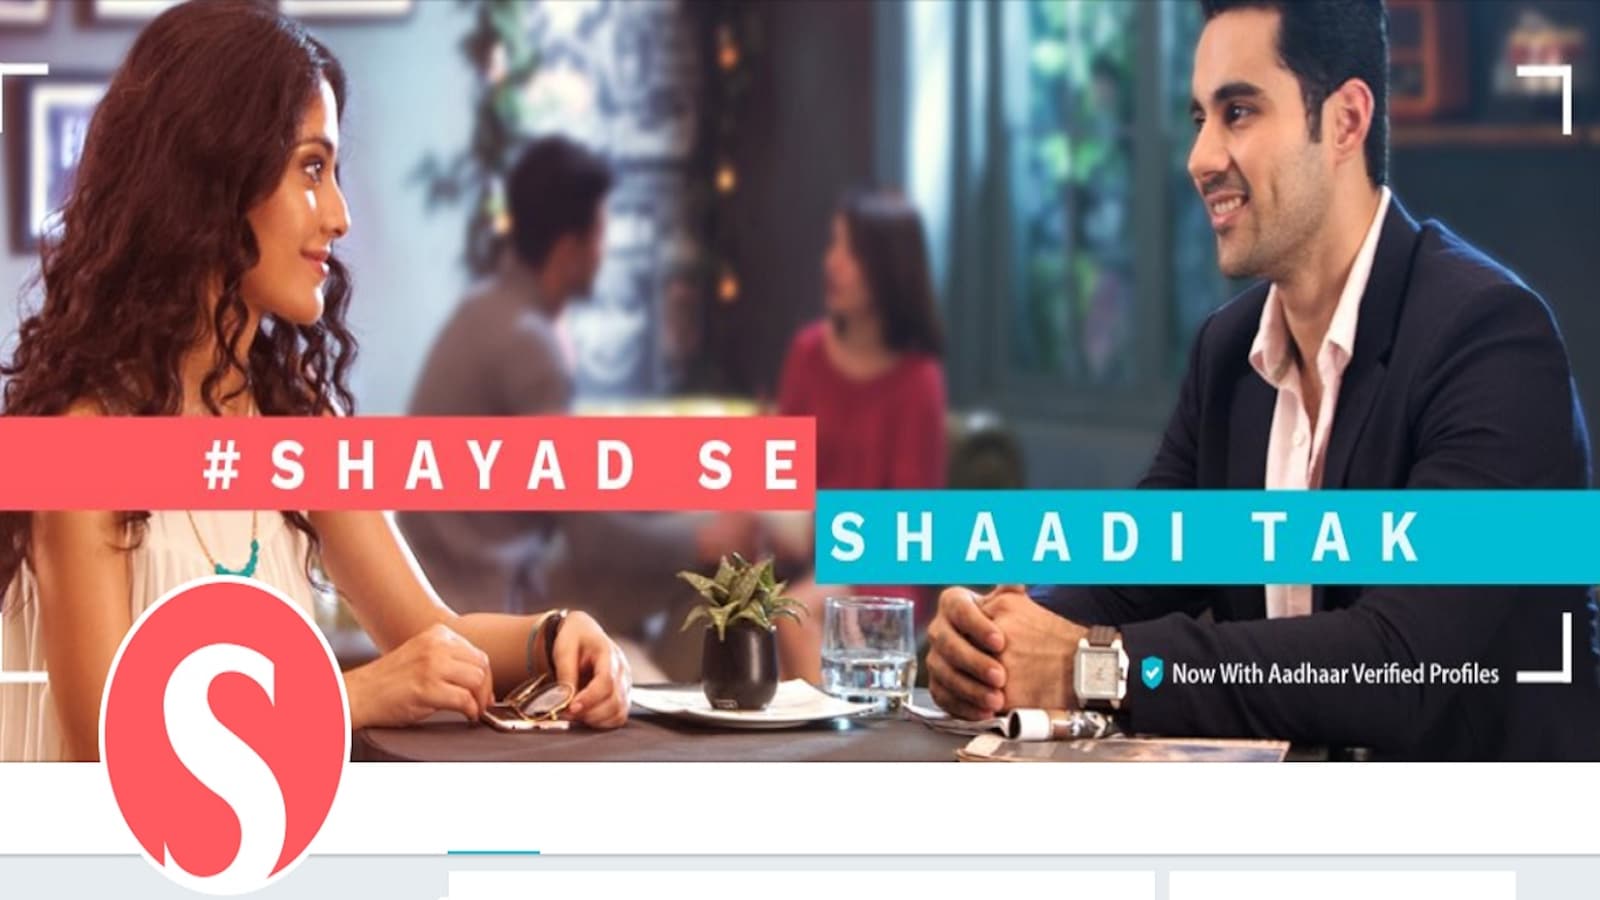 How can i get my money back from shaadi com?